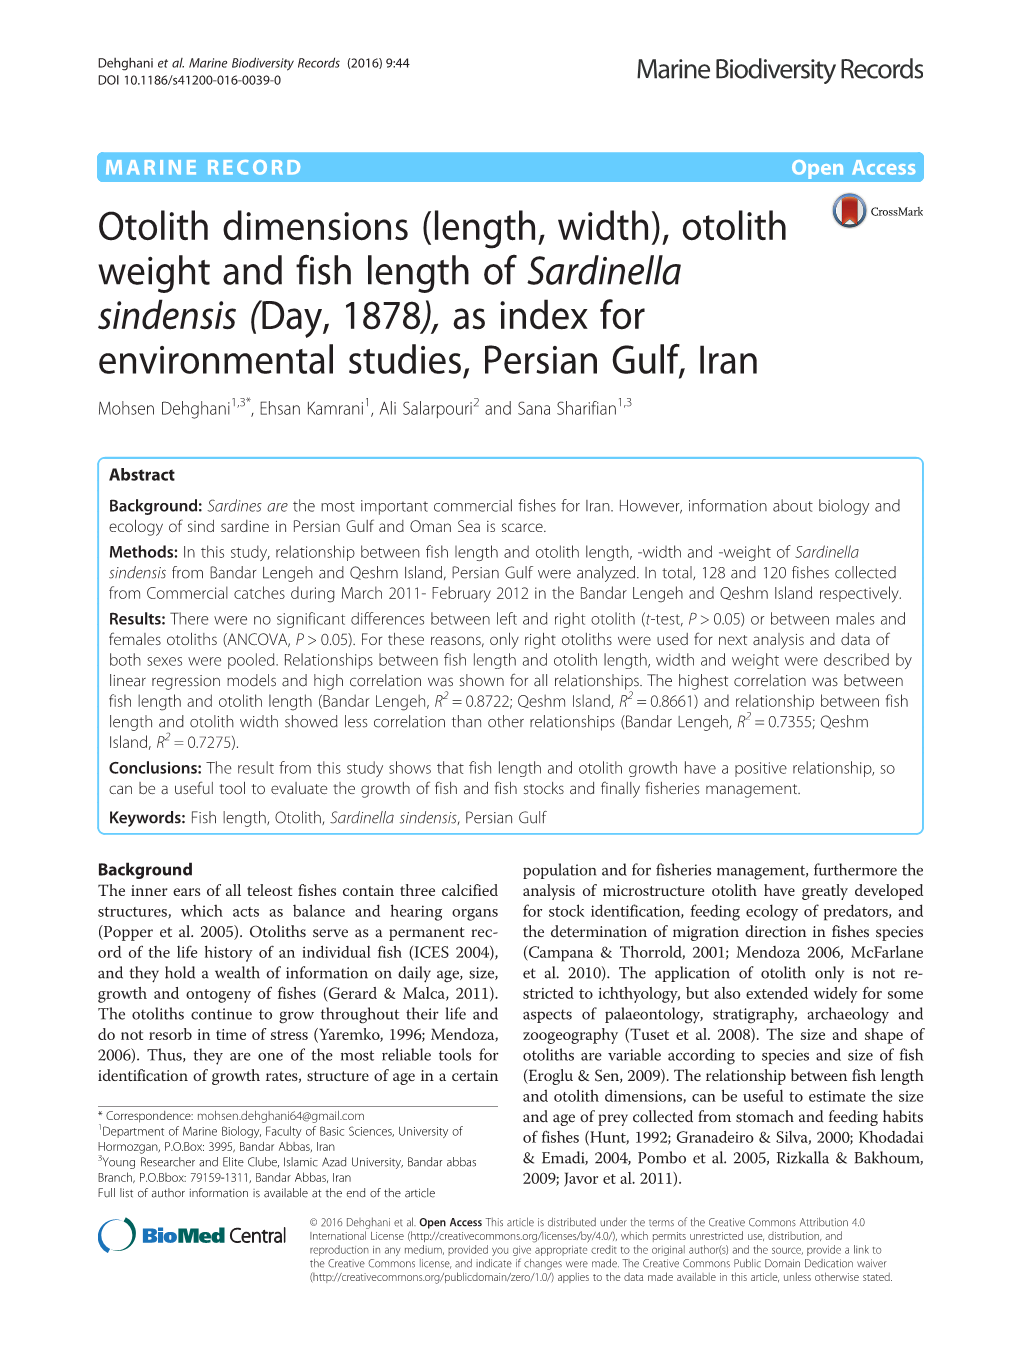 Otolith Weight and Fish Length of Sardinella Sindensis